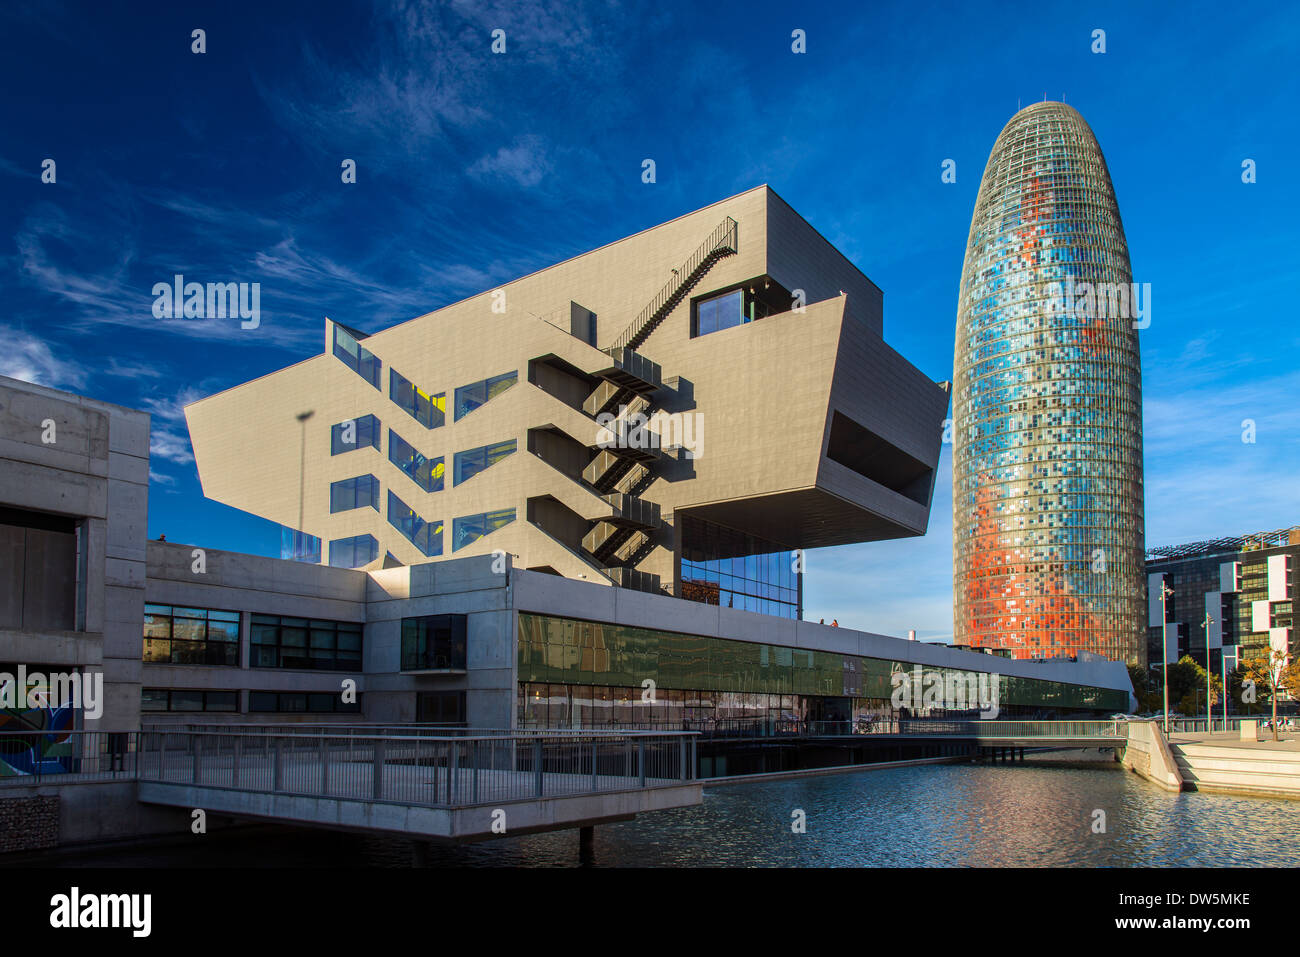 Design Museum or Museu del Disseny with Torre Agbar behind at night, Barcelona, Catalonia, Spain Stock Photo